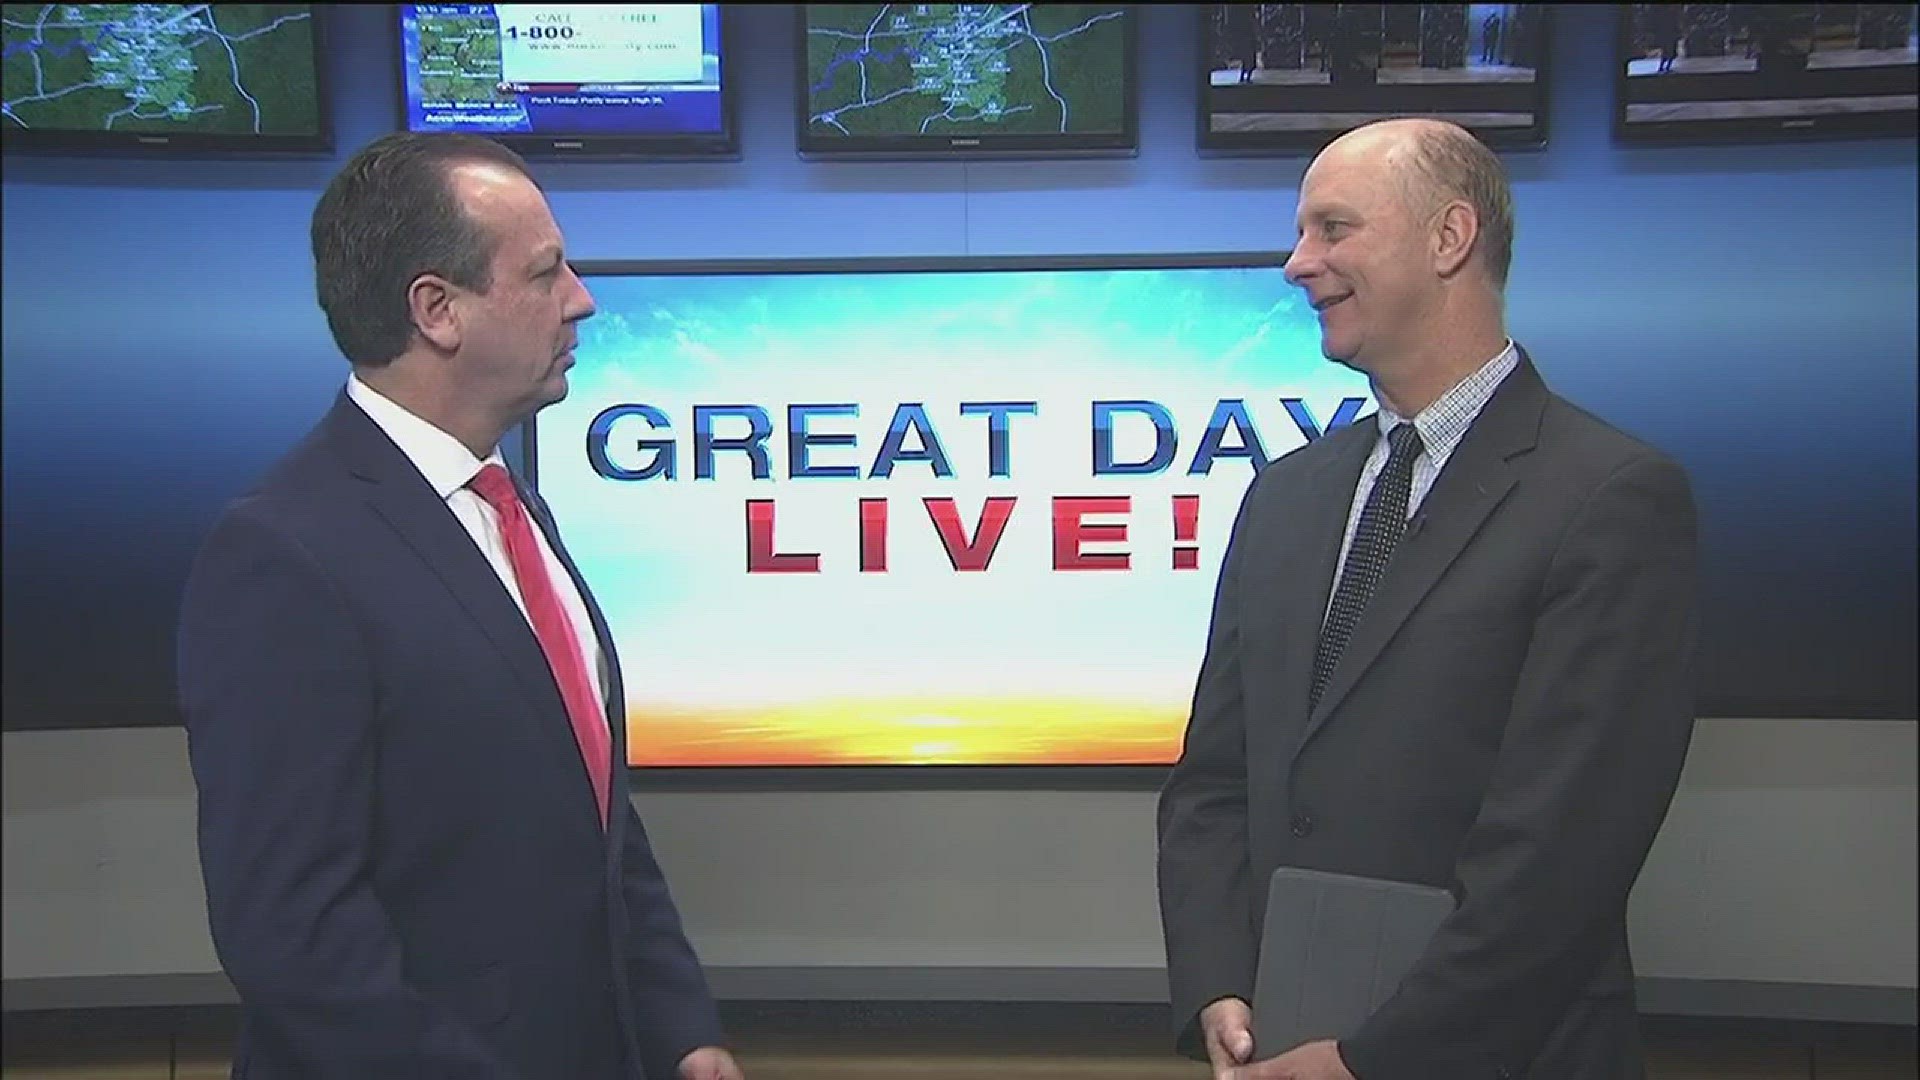 Mike Schafer on Great Day Live!